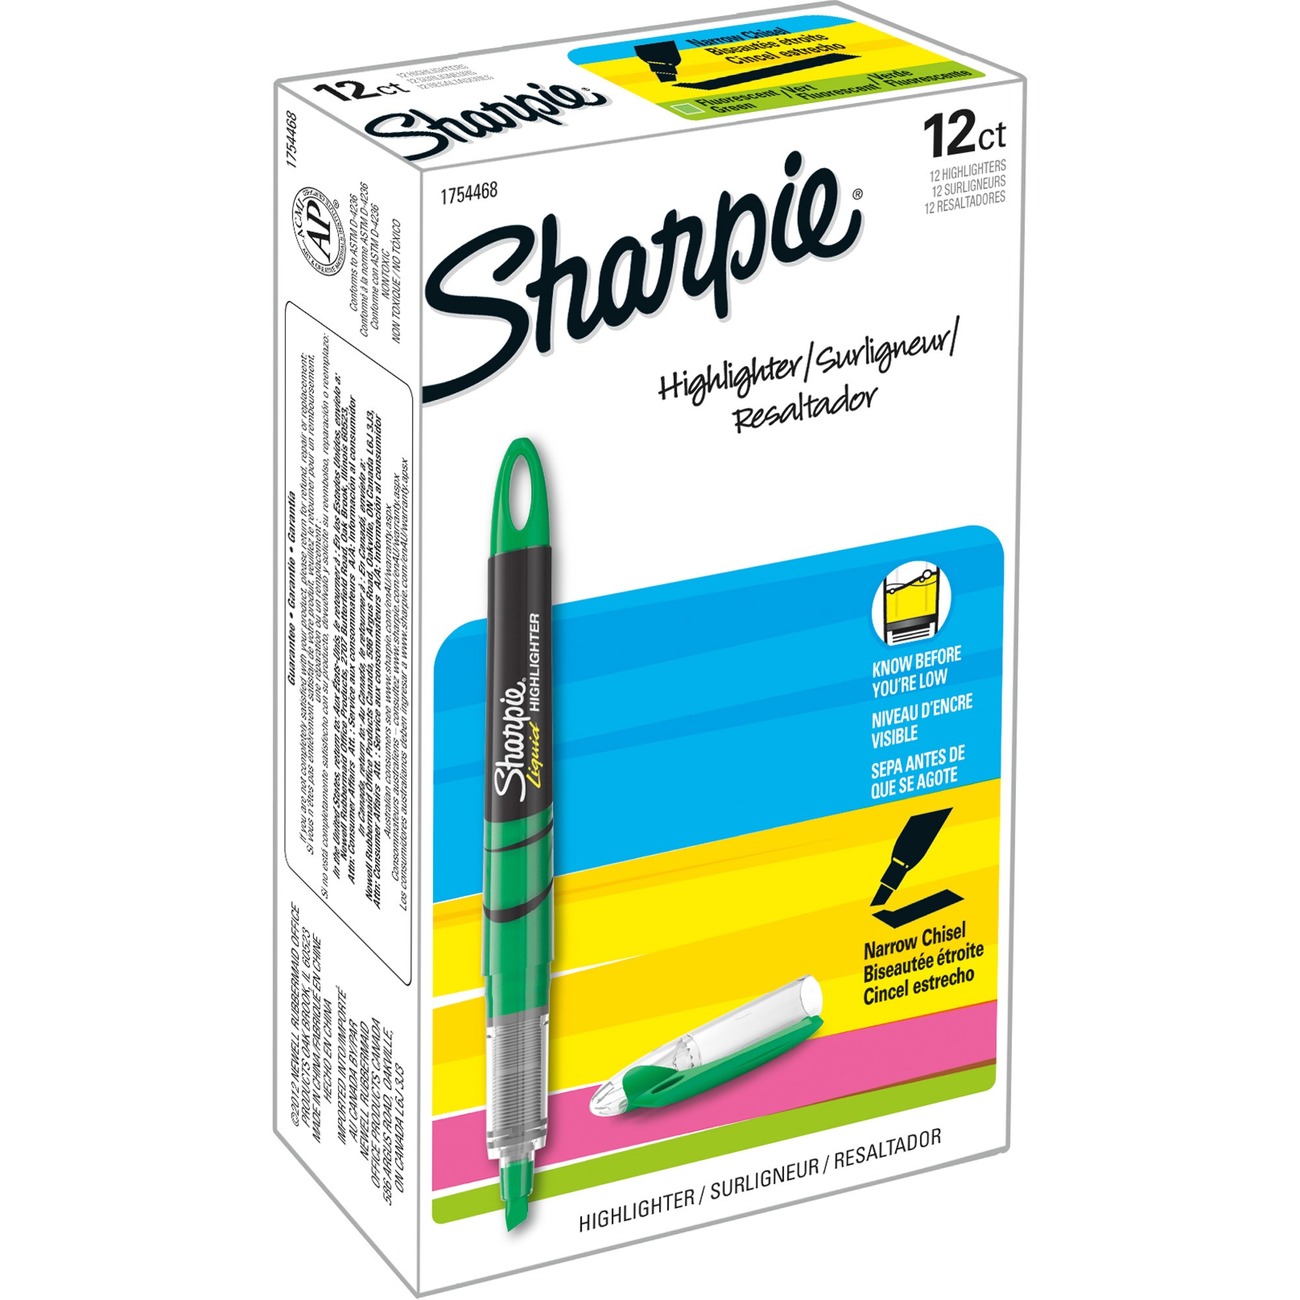 Sharpie - Permanent Marker: Green, AP Non-Toxic, Chisel Point